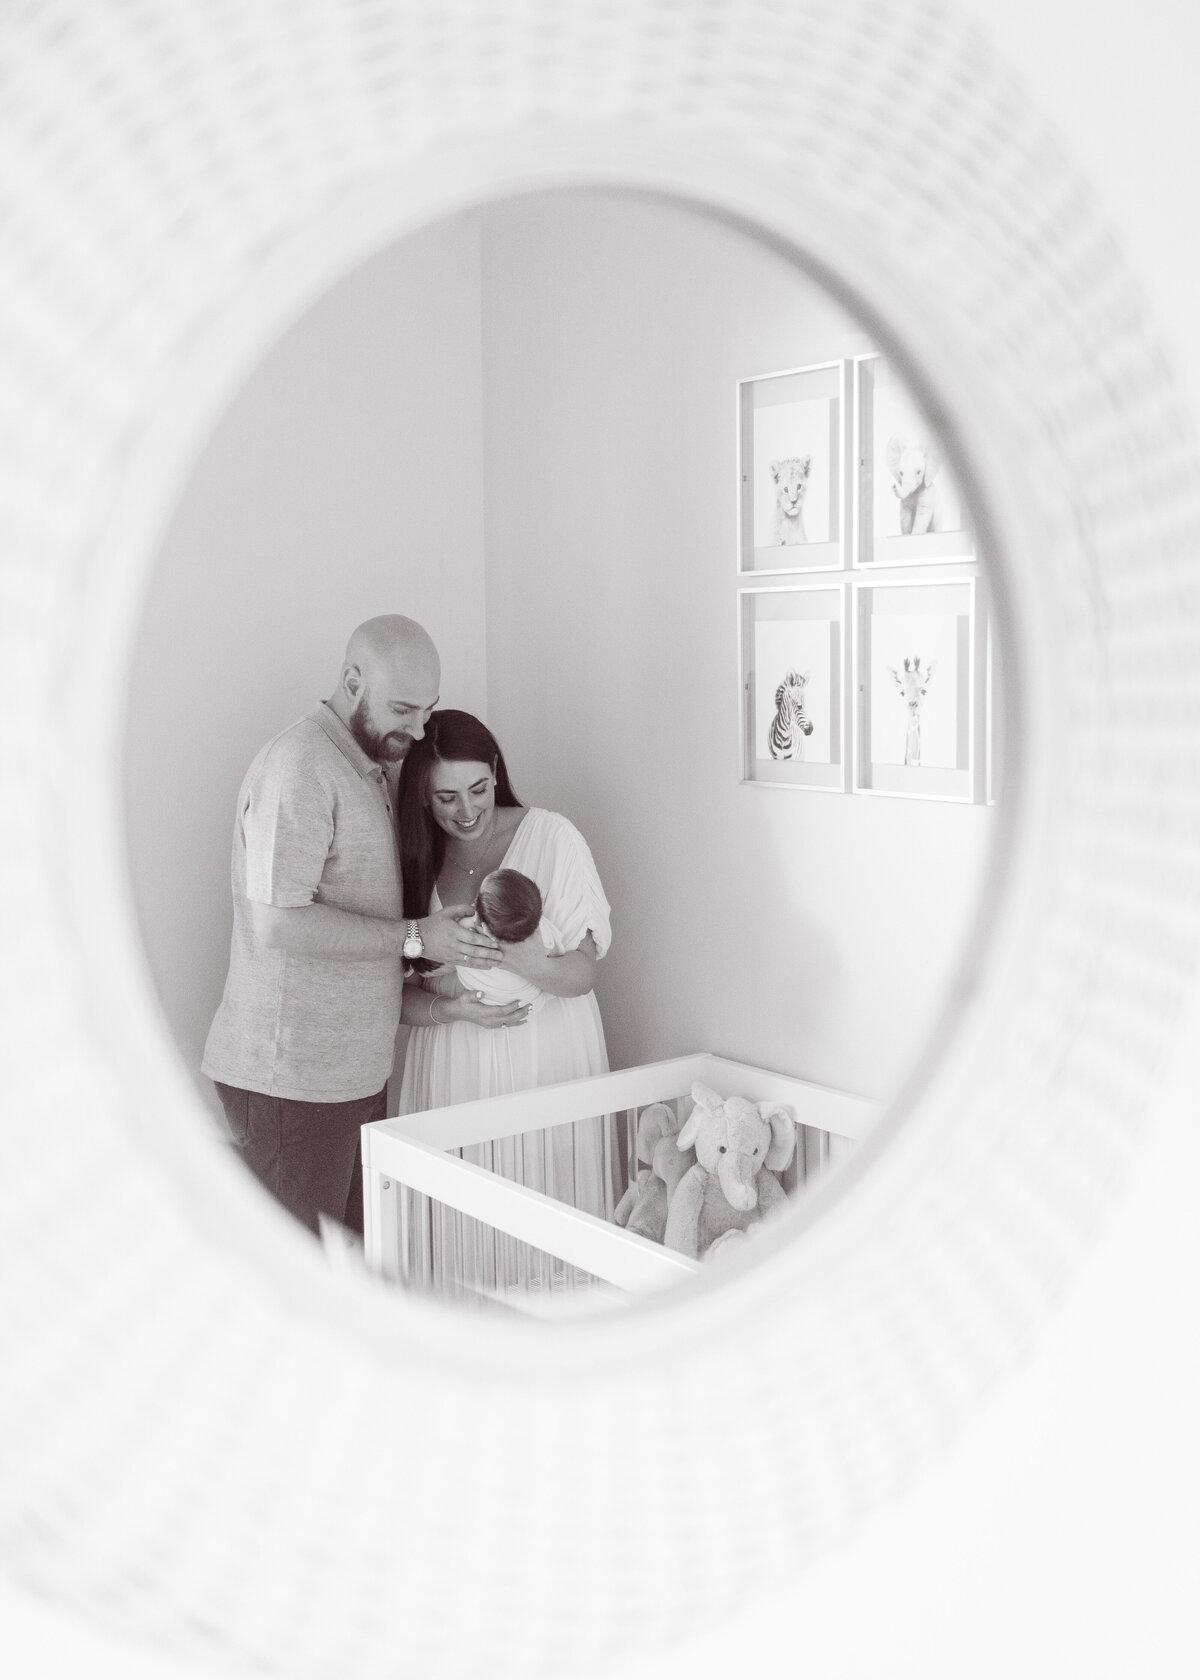 Black and white portrait of a man and woman reflected on a round mirror holding a newborn baby next to a crib.